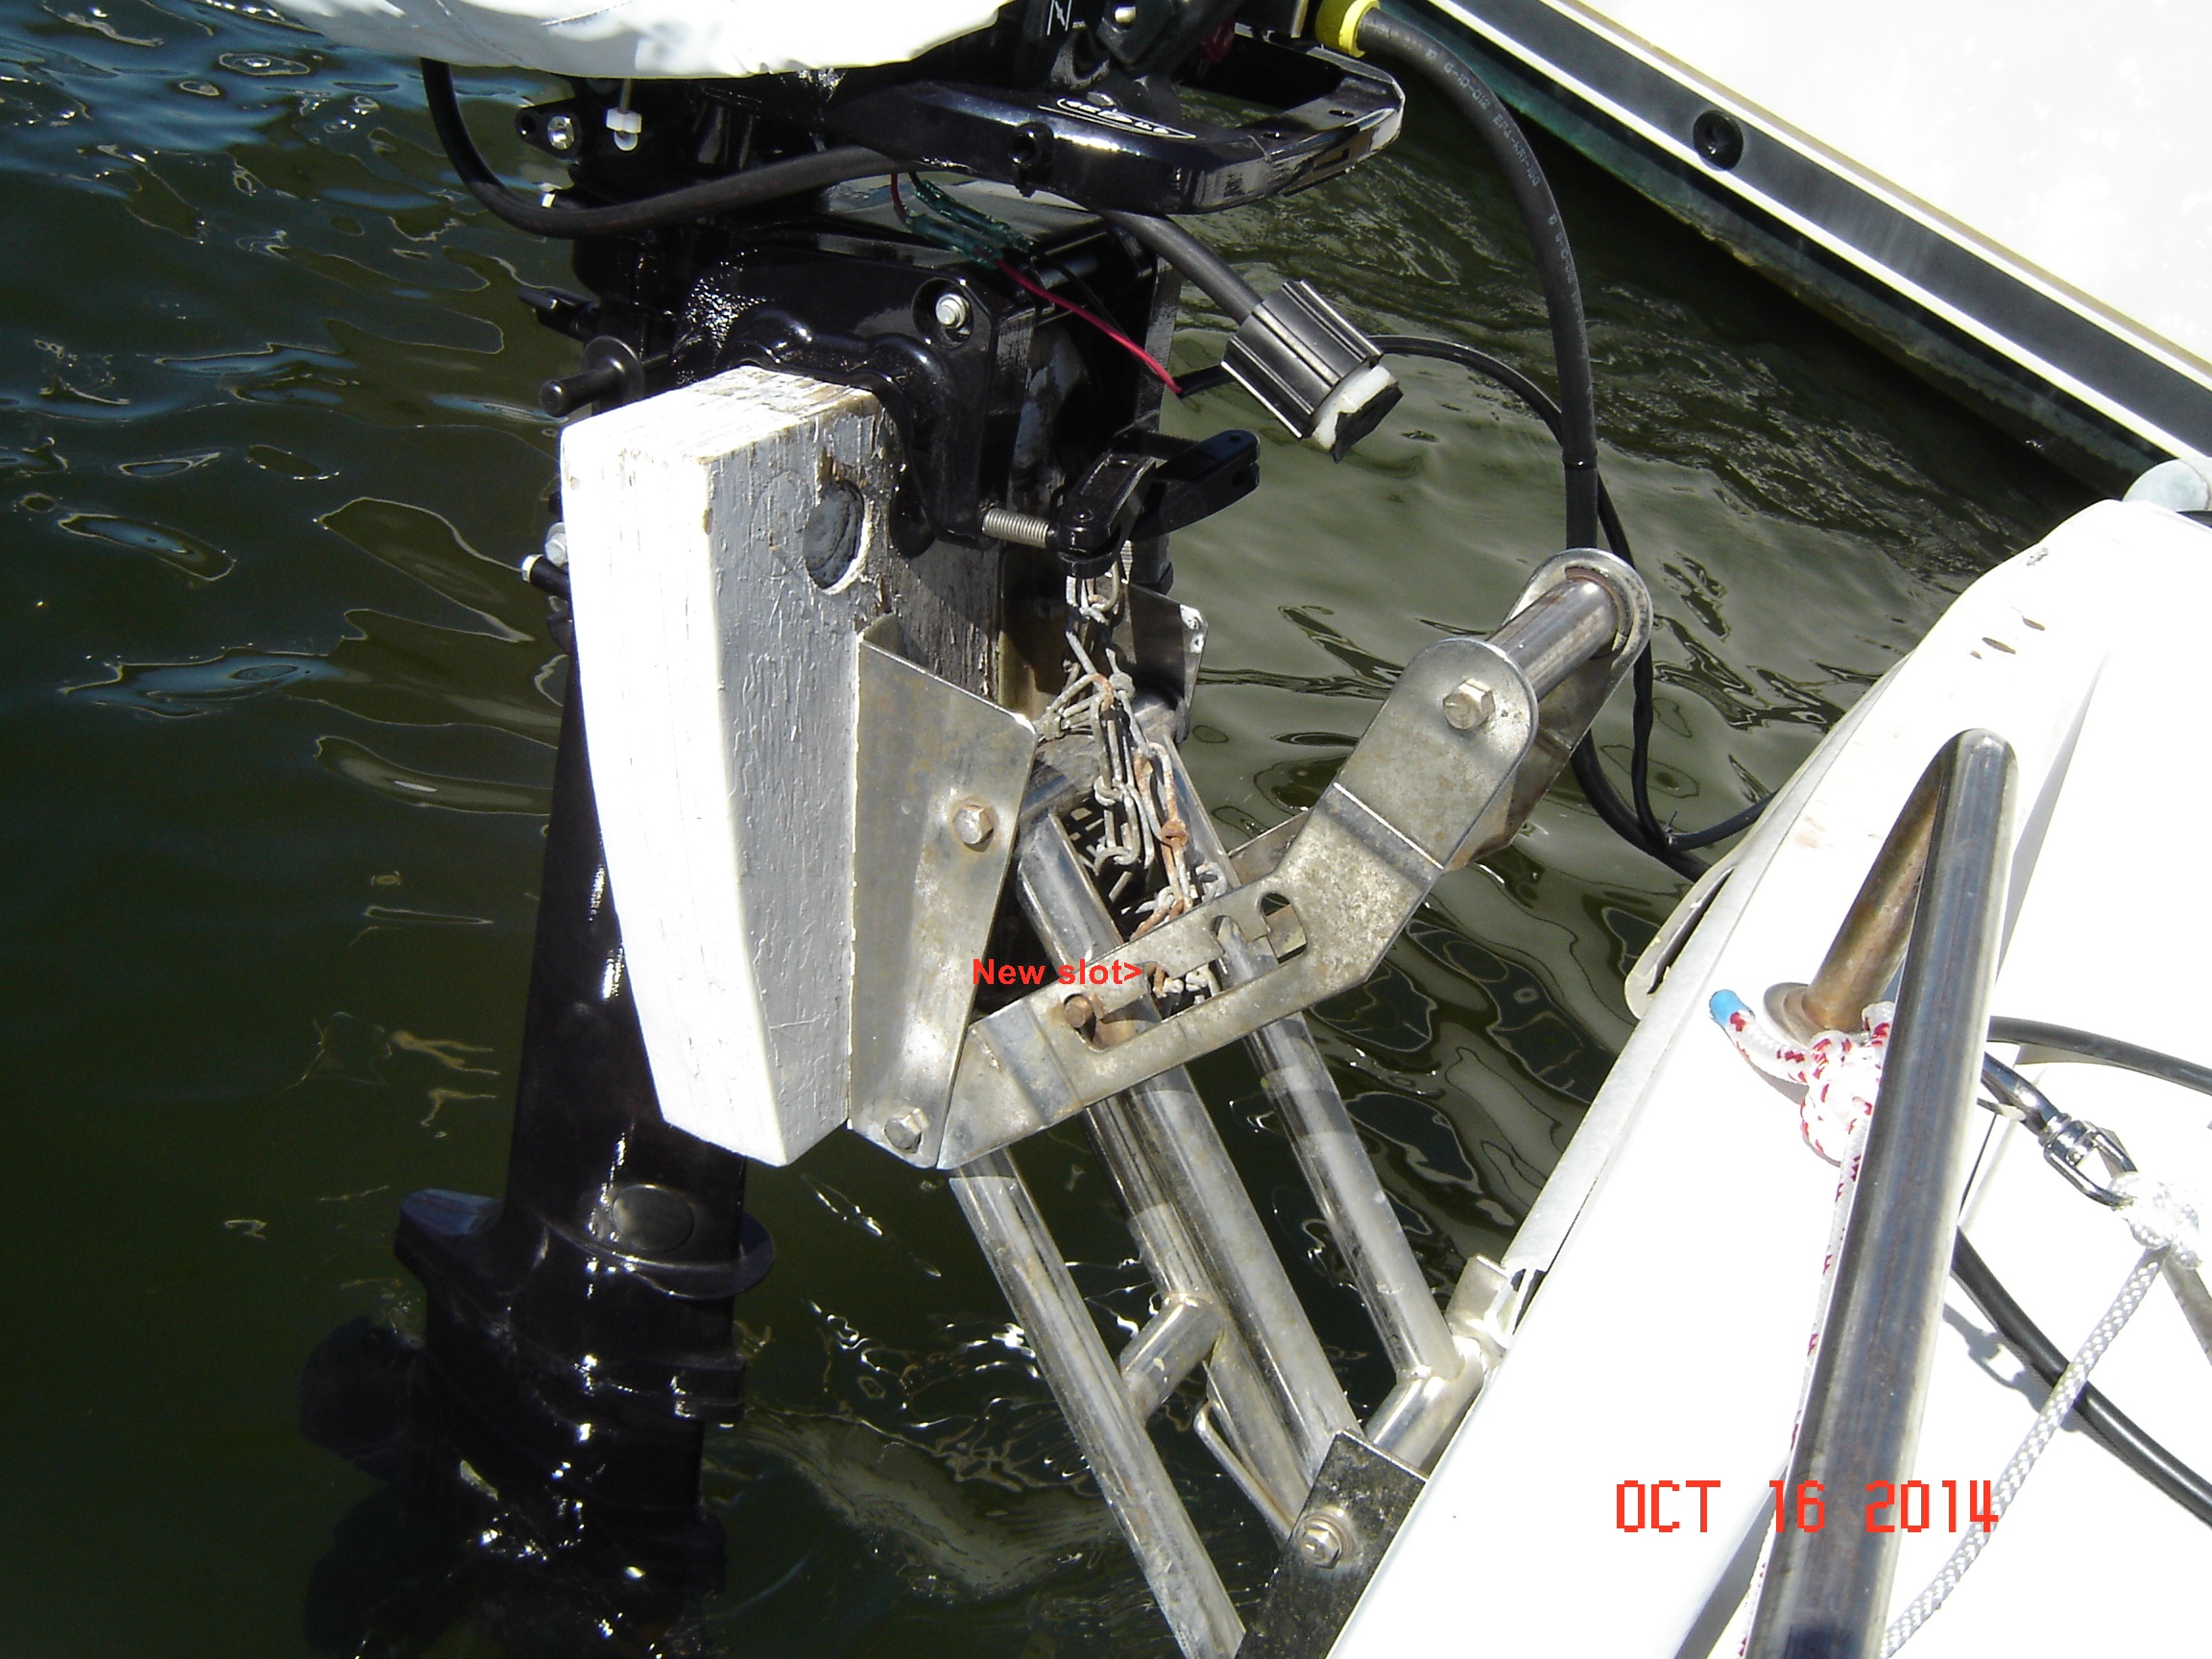 Motor hose hook water up outboard How to